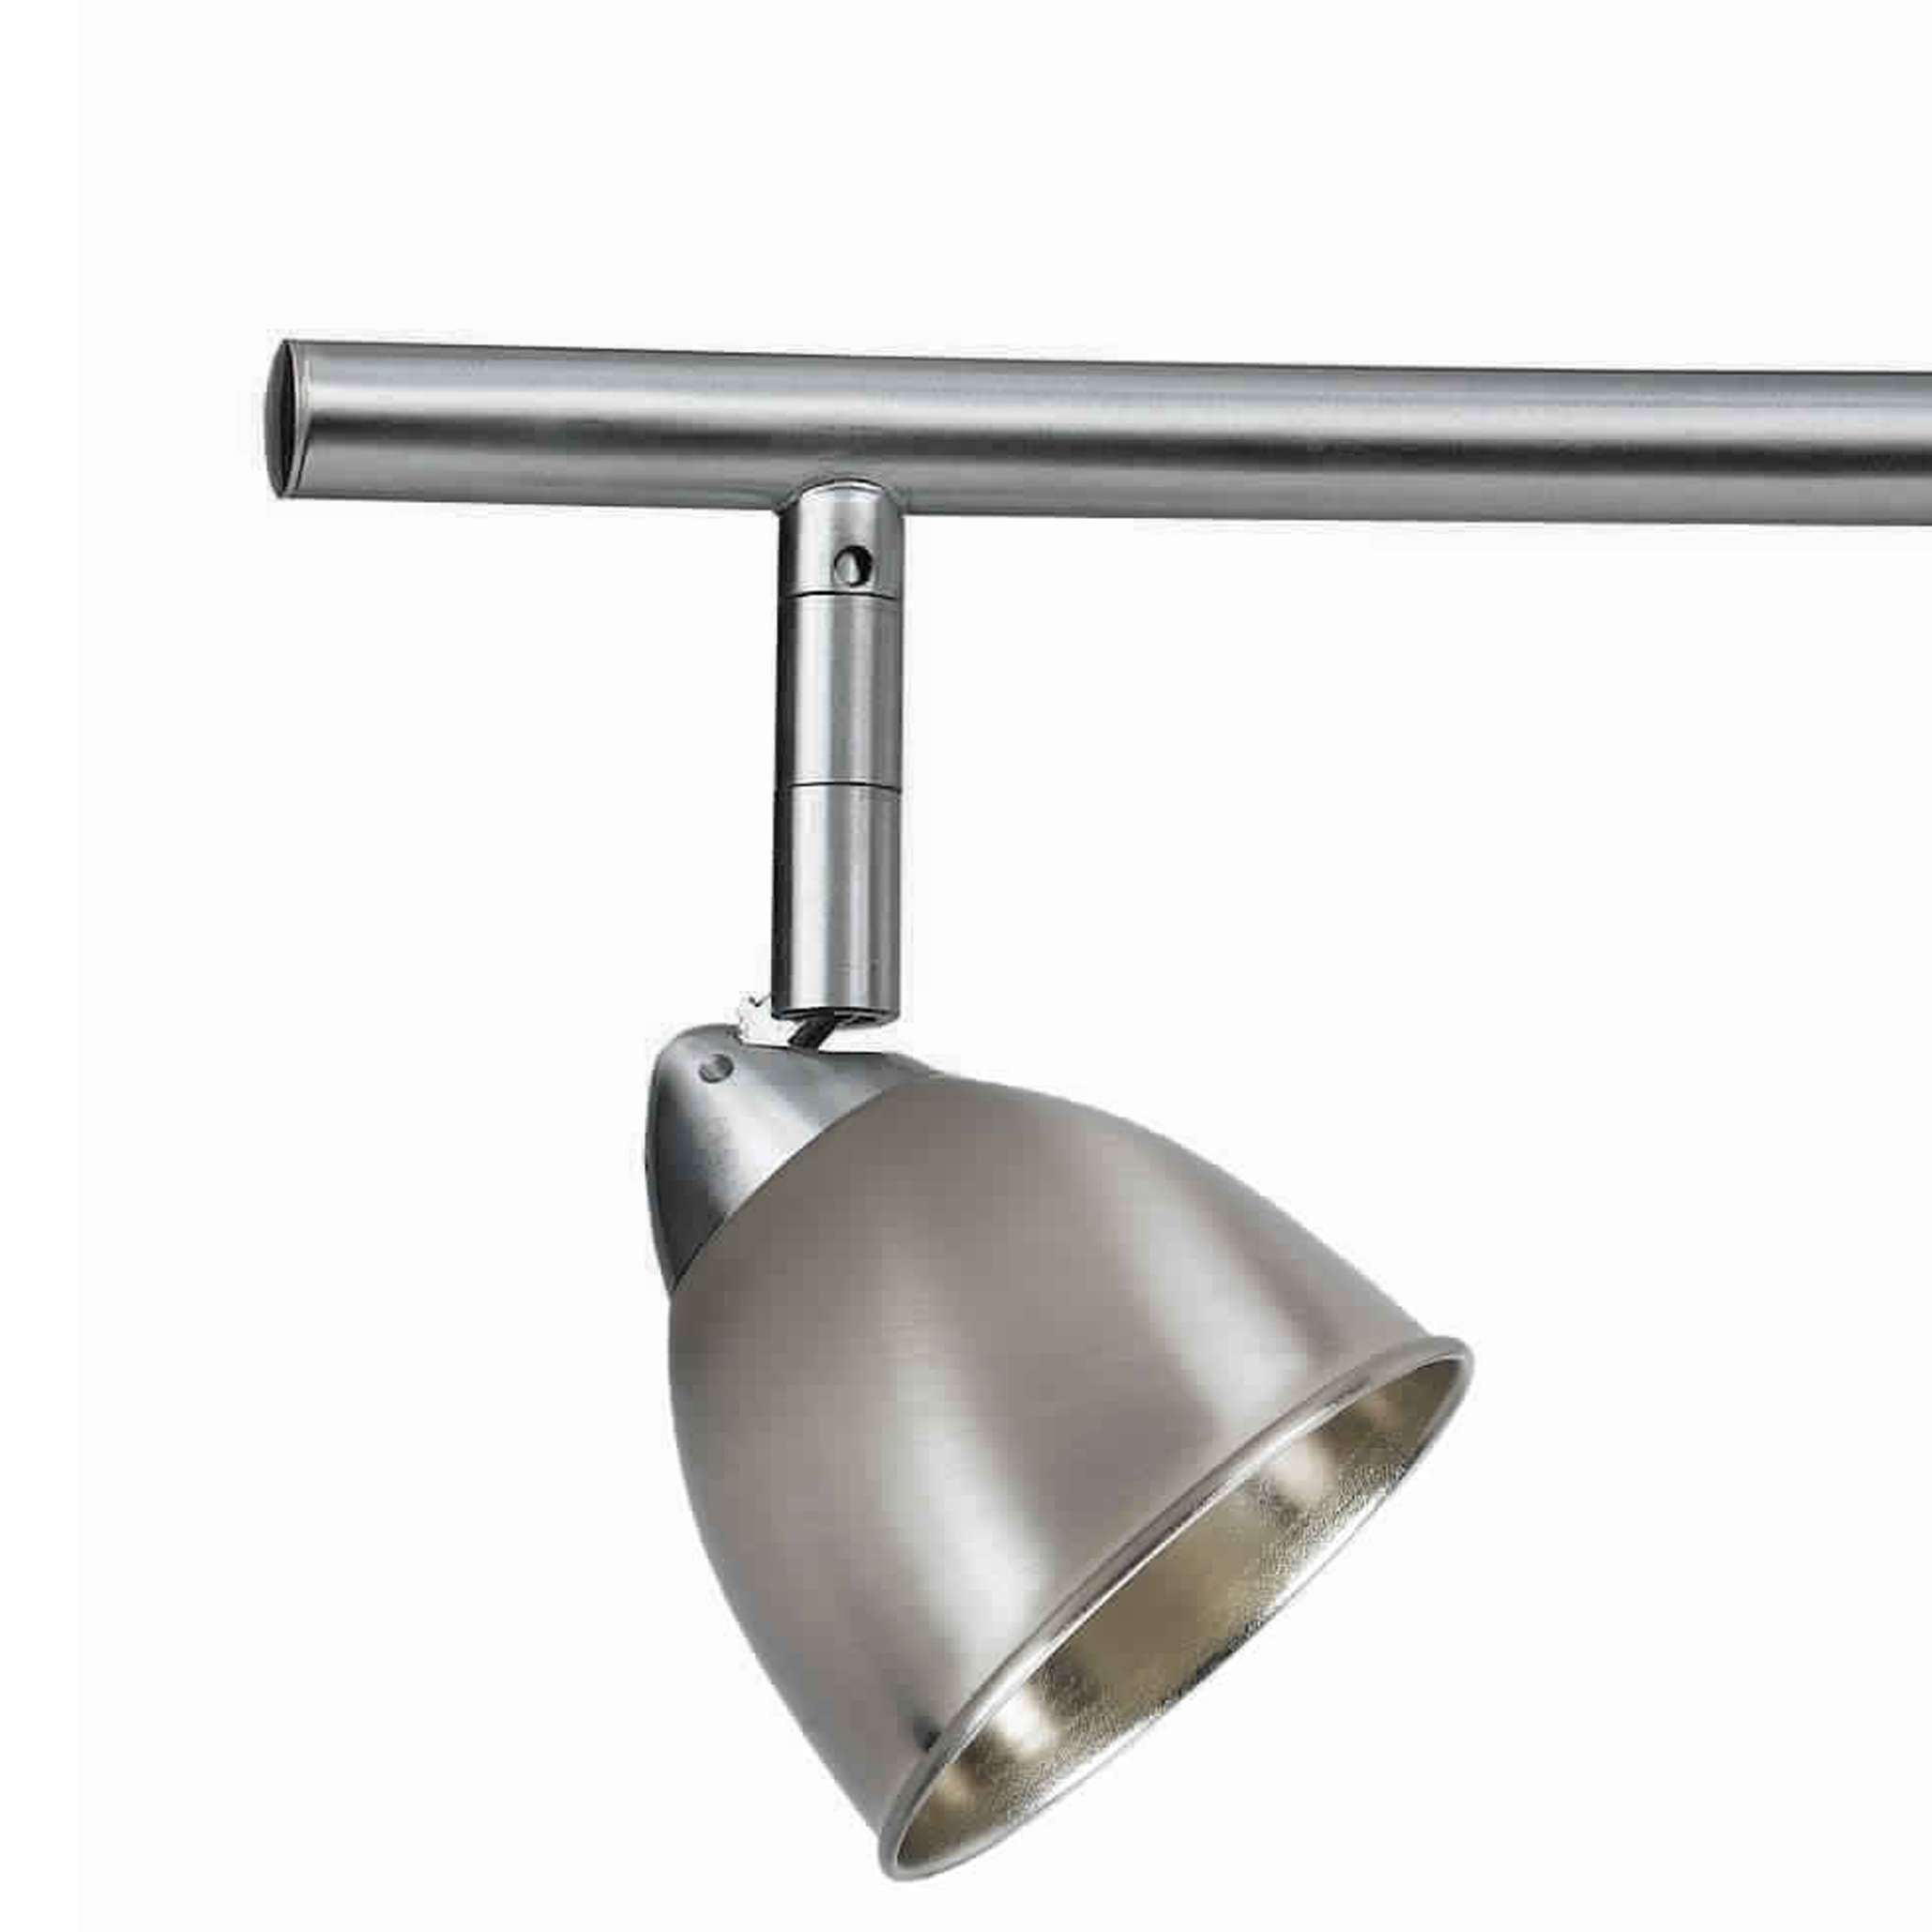 3 Light 120V Metal Track Light Fixture With Round Shade, Silver By Benzara